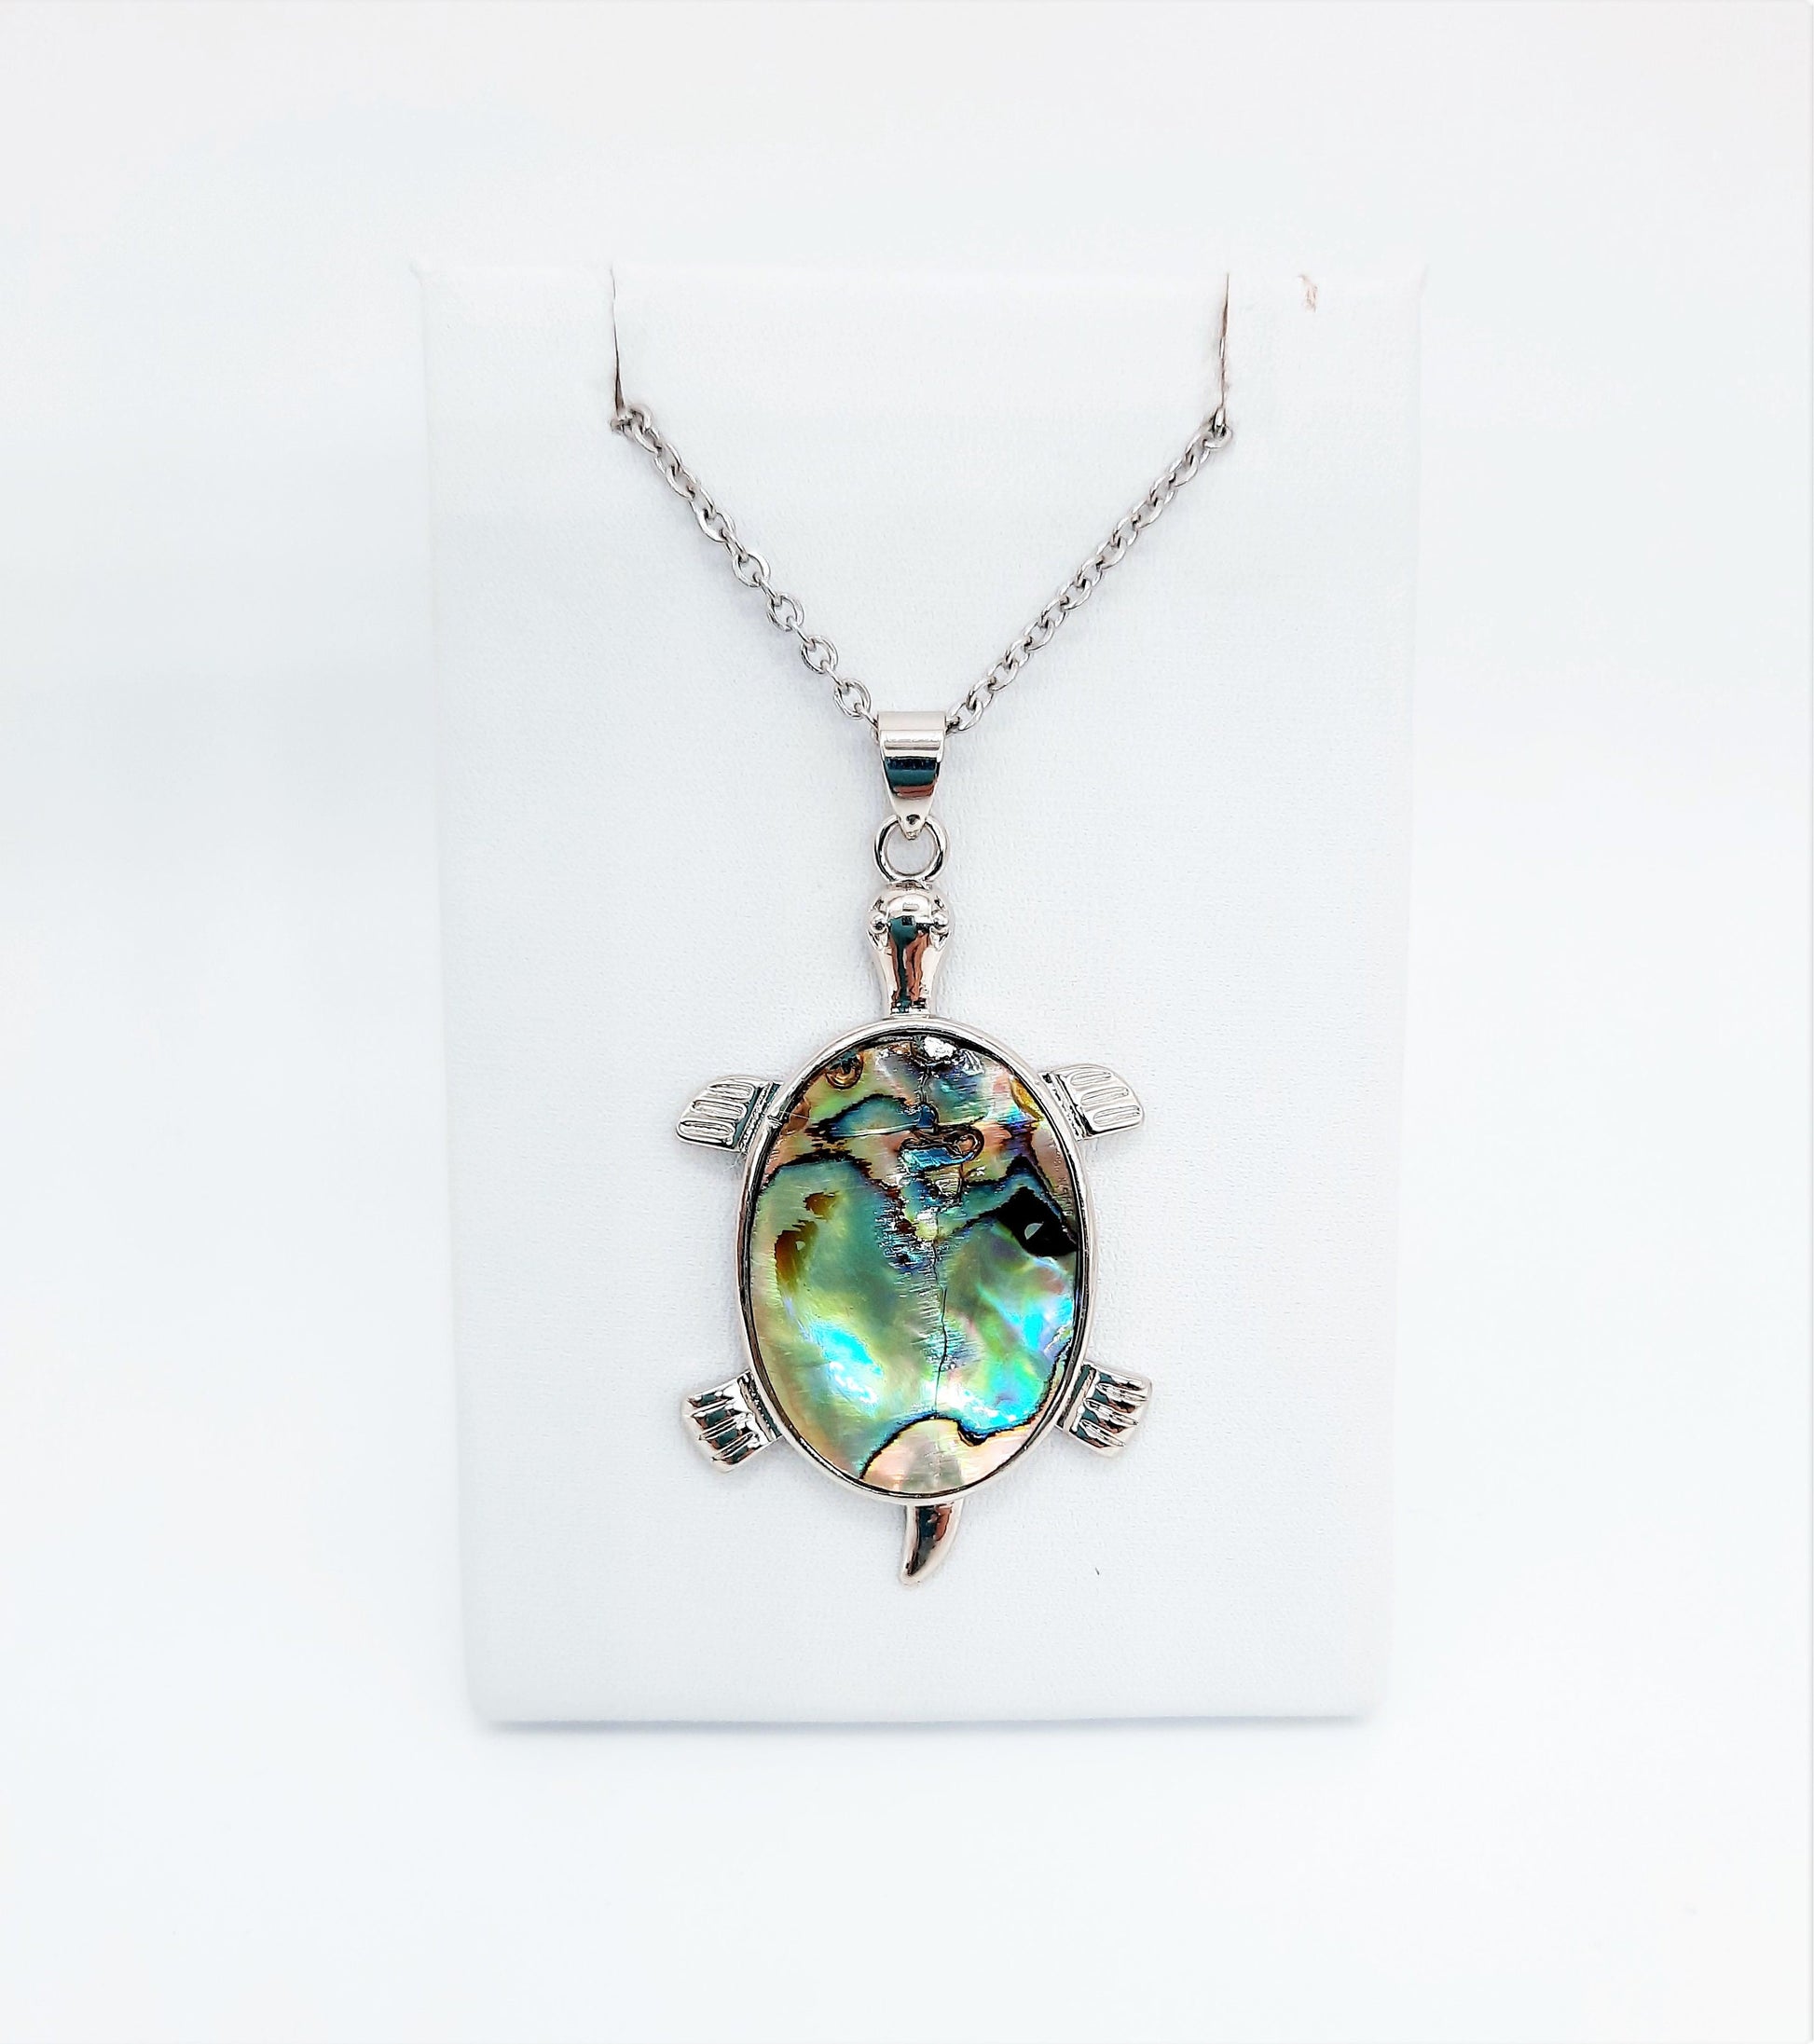 Abalone/Paua Seashell Sea Turtle Pendant Necklace - Stainless Steel Hypoallergenic Chain-Lobster Claw Closure - Silver-Coated Brass Pendant